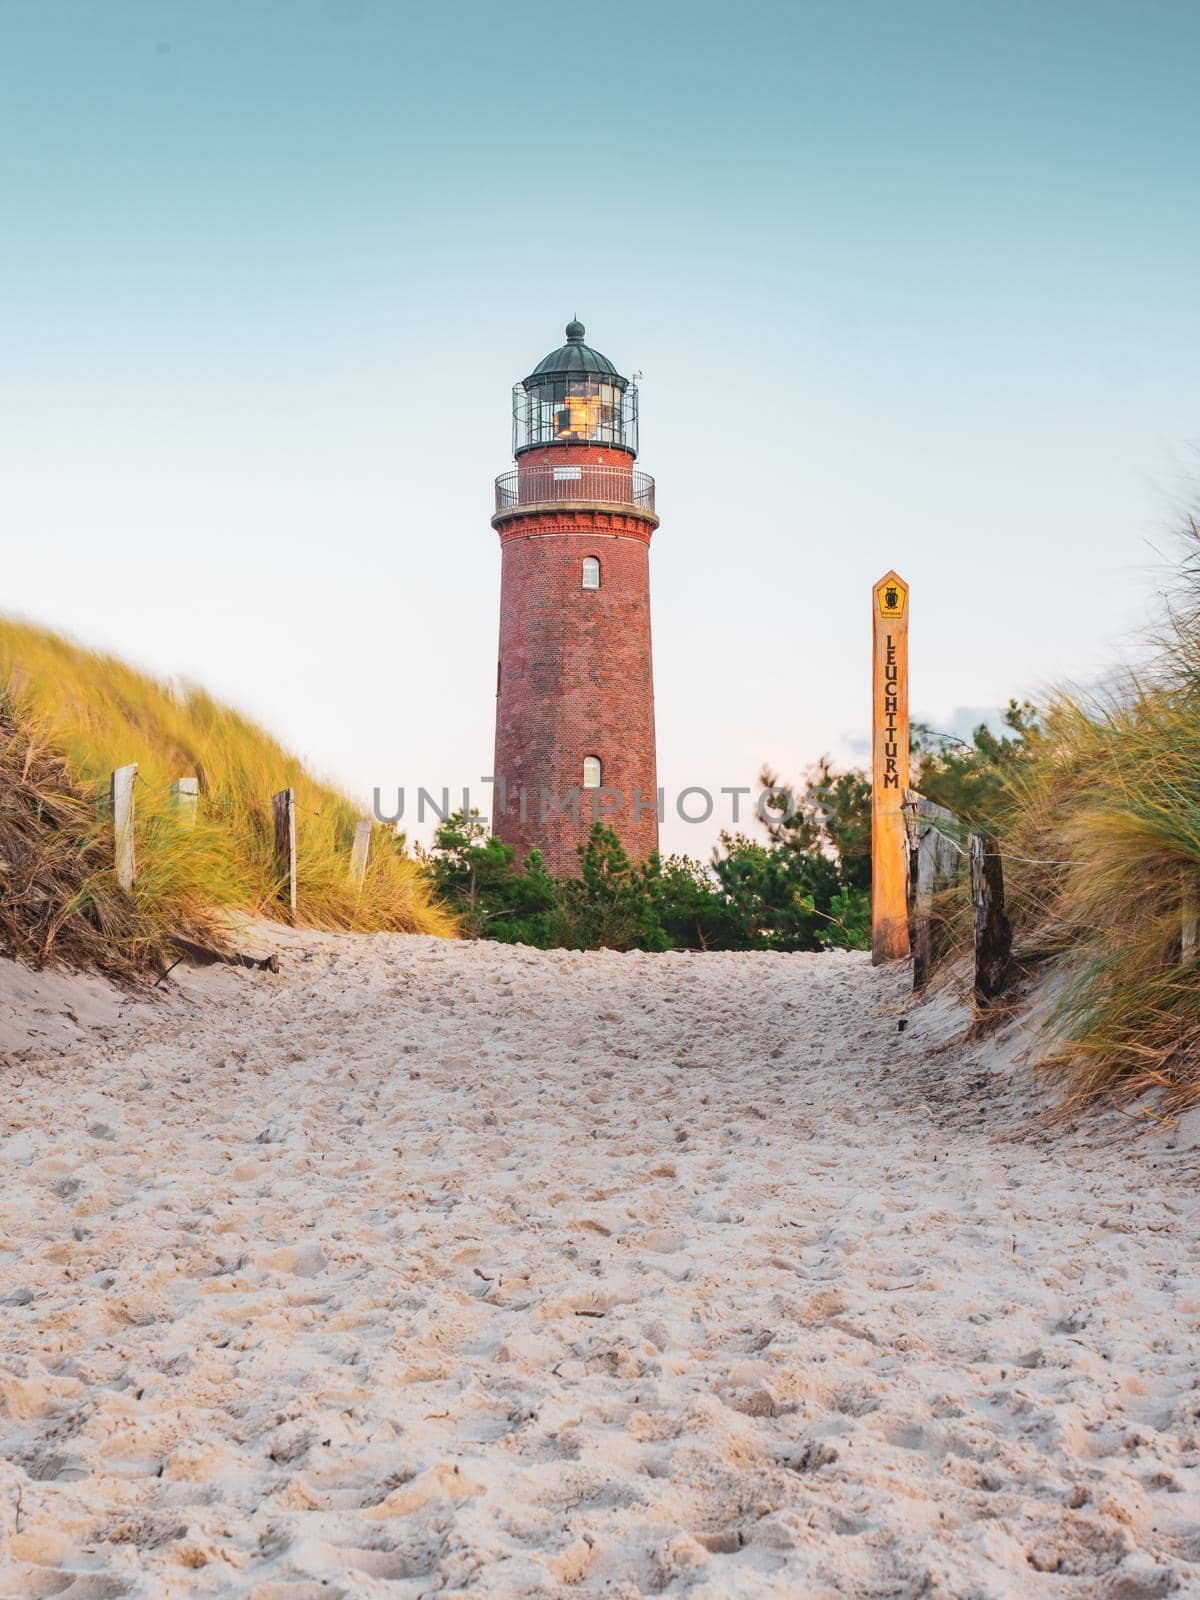 Lighthouse at the Darsser Ort with Natureum near Prerow Fischland-Darss-Zingst by rdonar2